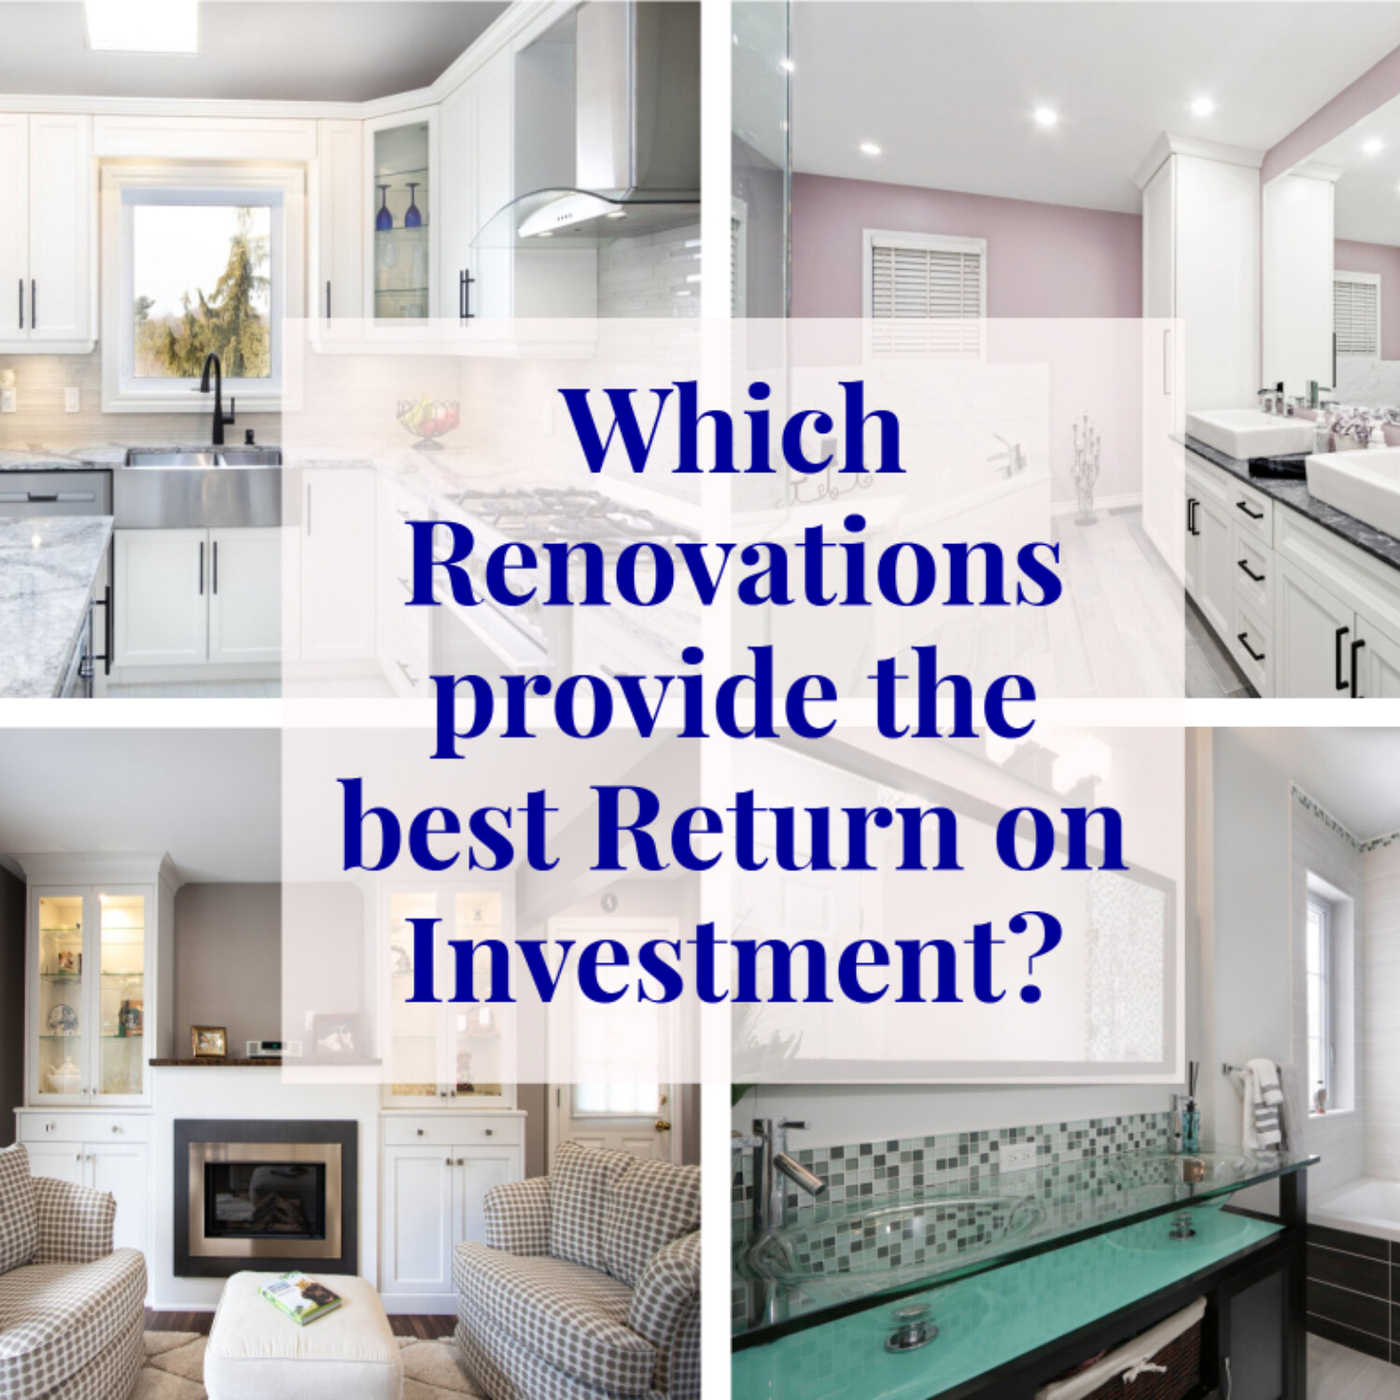 Home Renovations for Maximum Return on Investment